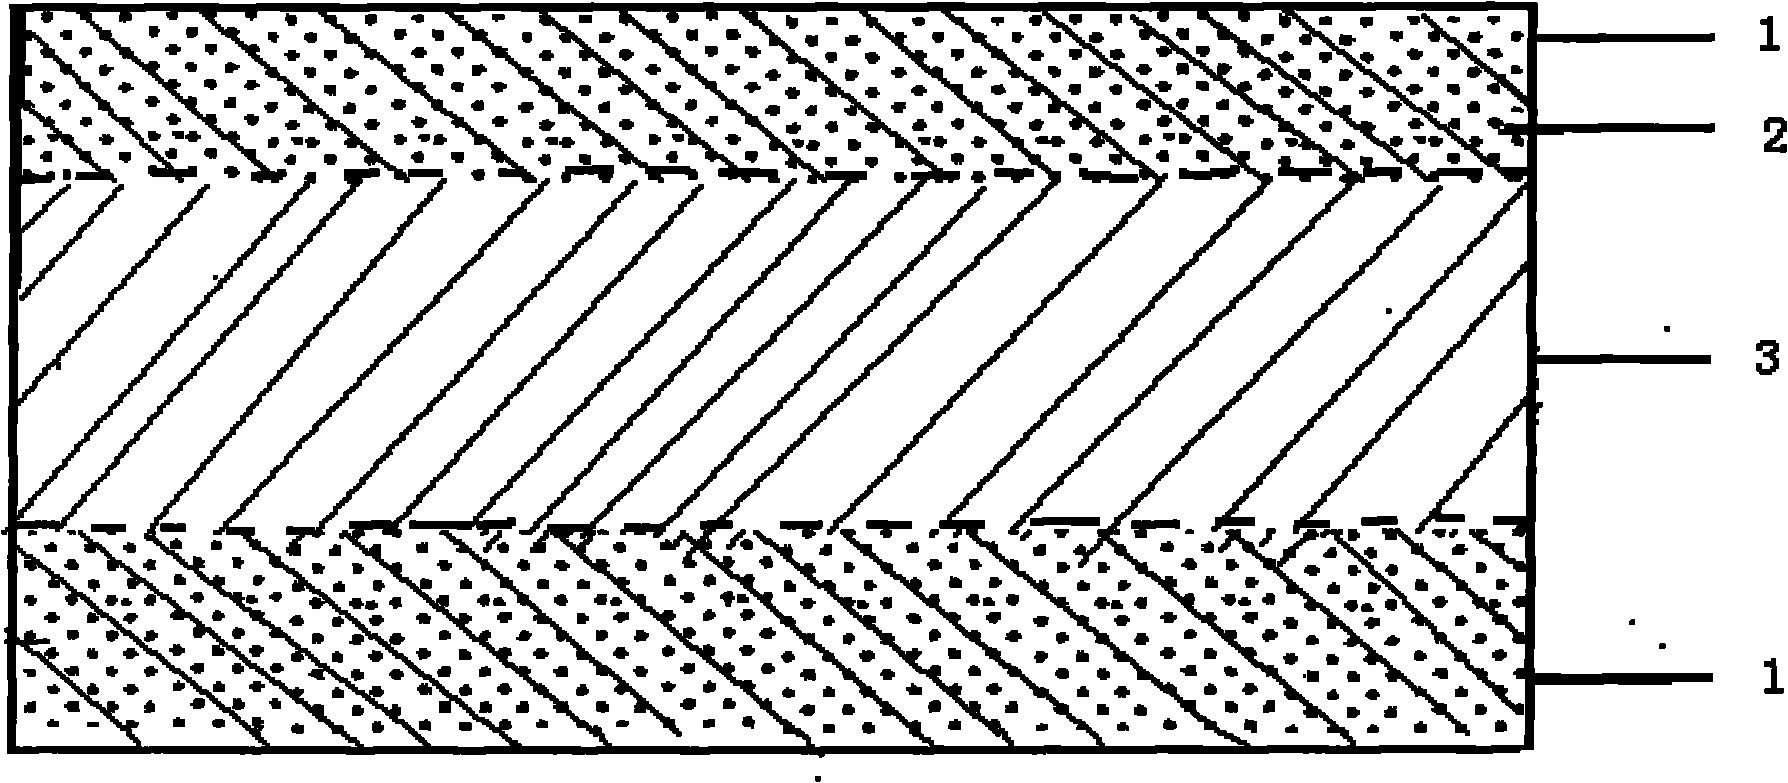 Perfluorosulfonic composite proton exchange membrane for fuel cell